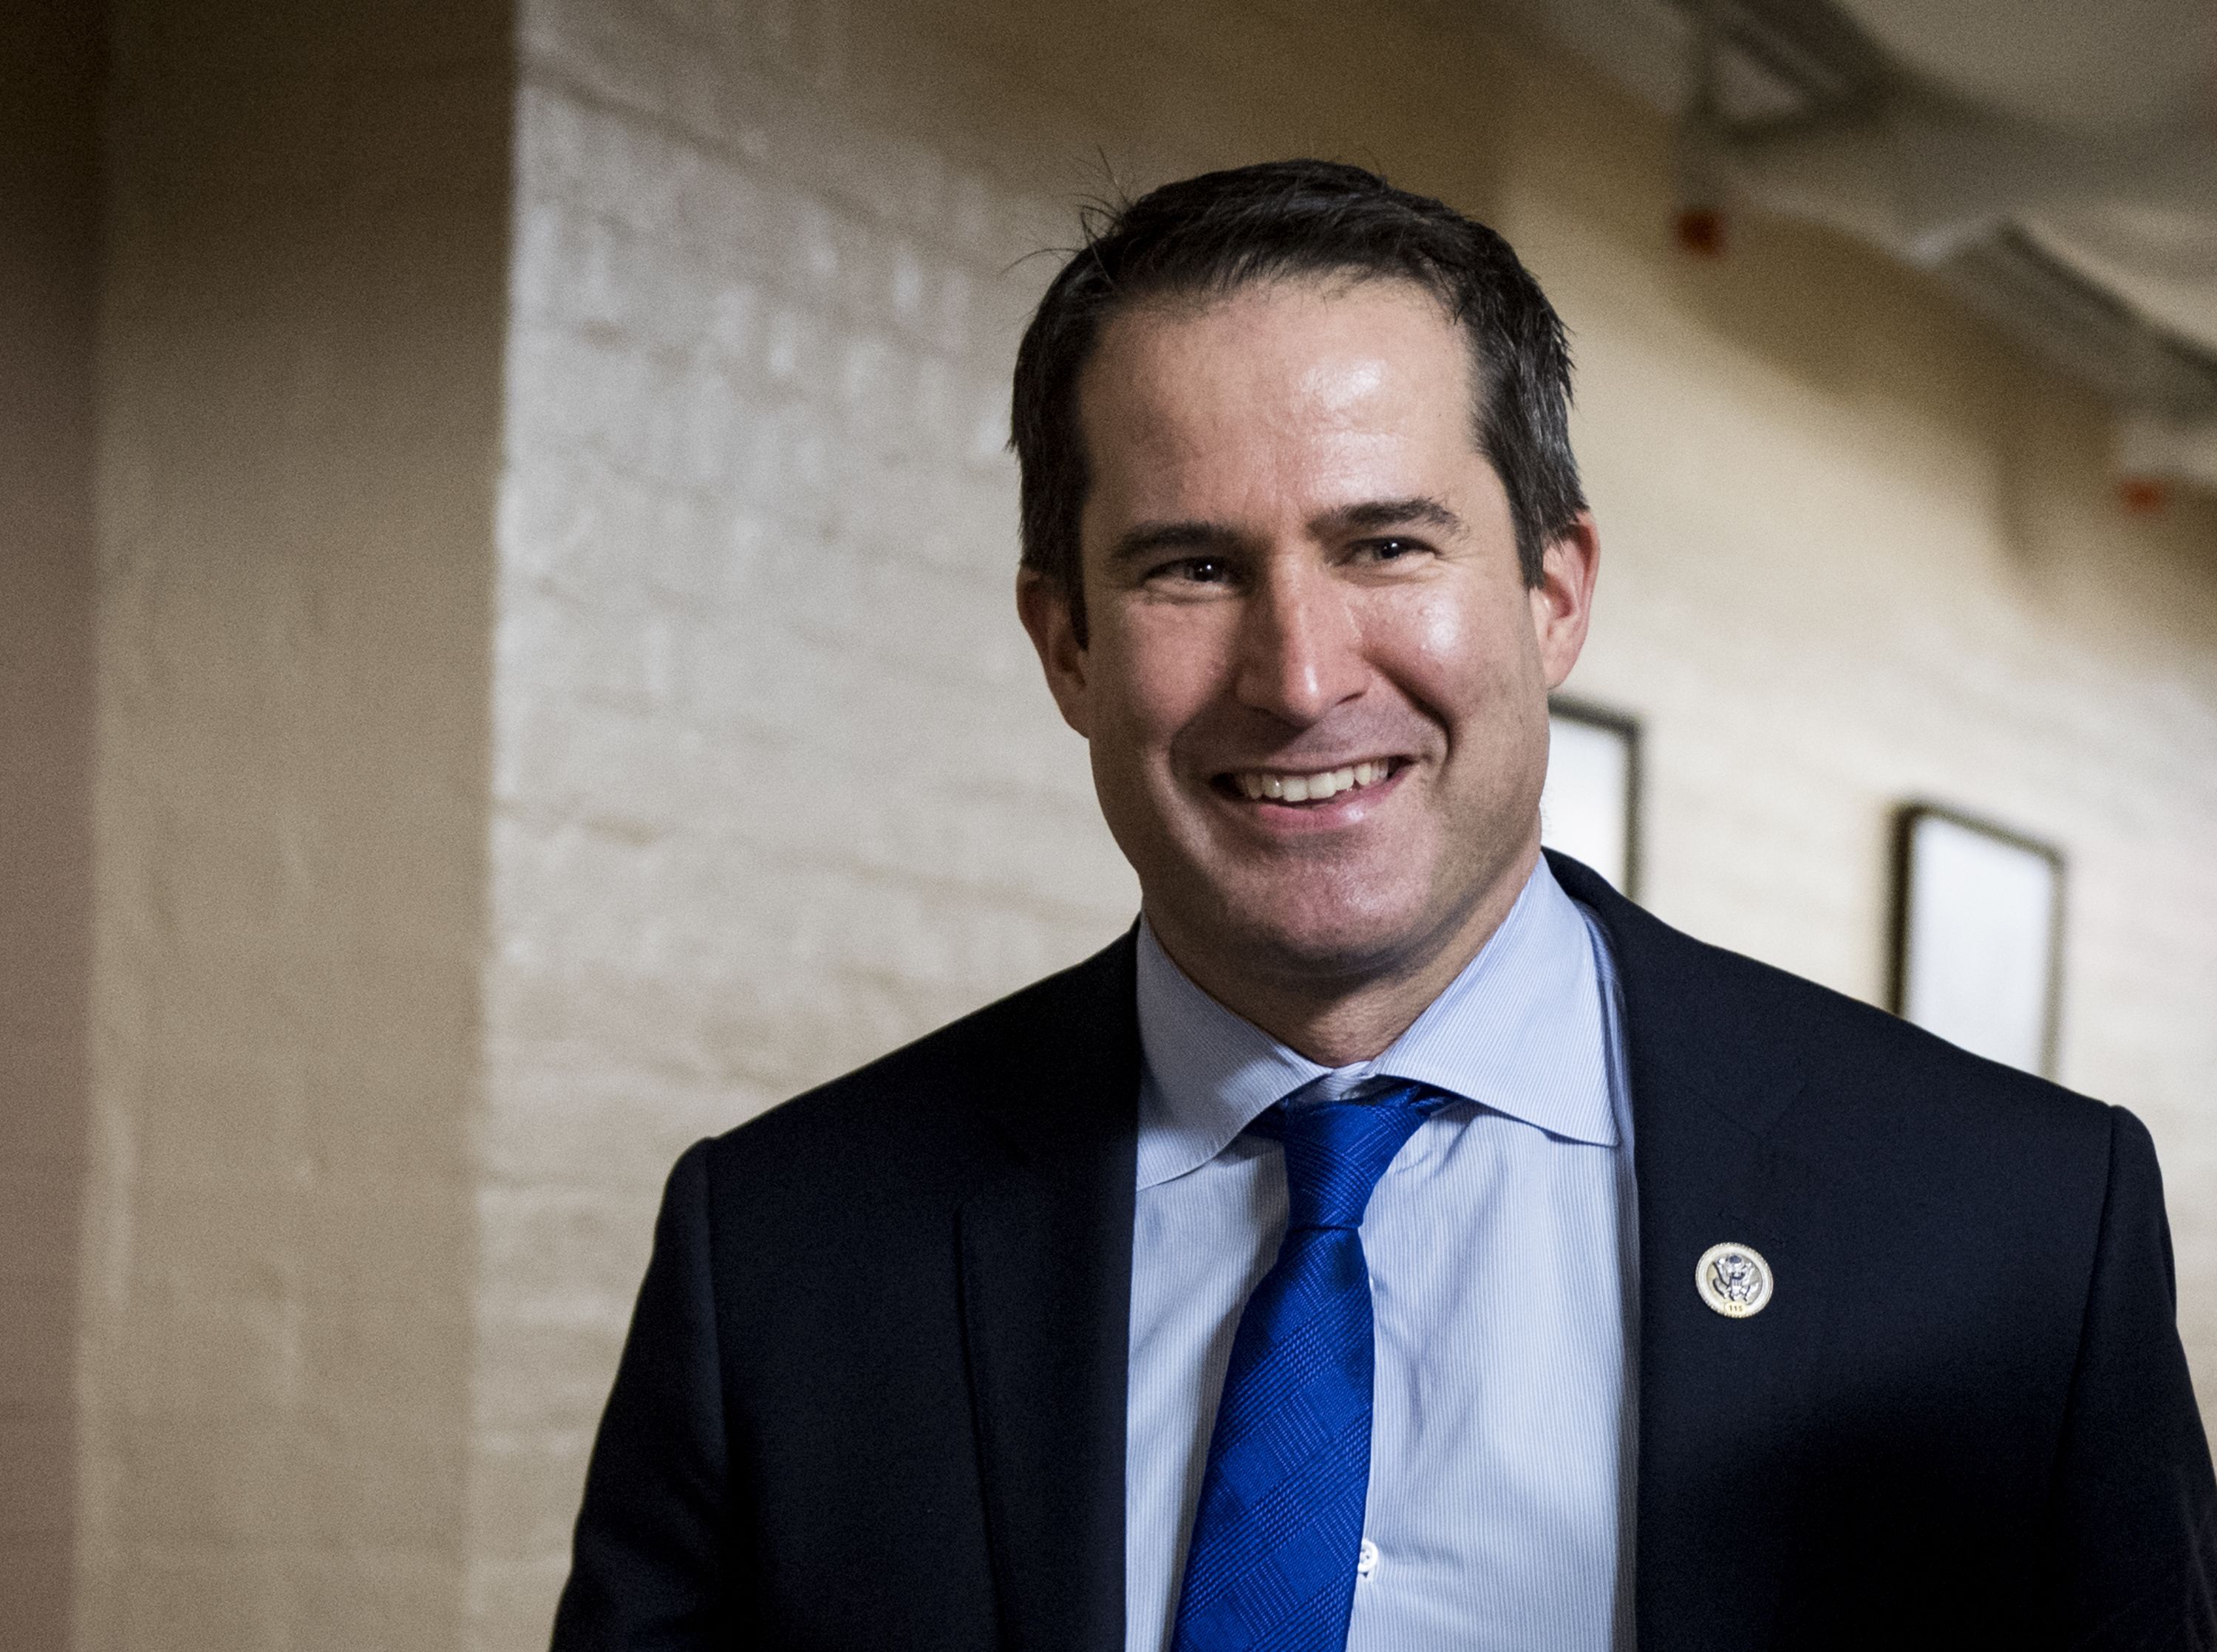 US Rep. Seth Moulton arrives for a meeting on Capitol Hill in November 2018. He has been in Congress since 2015.